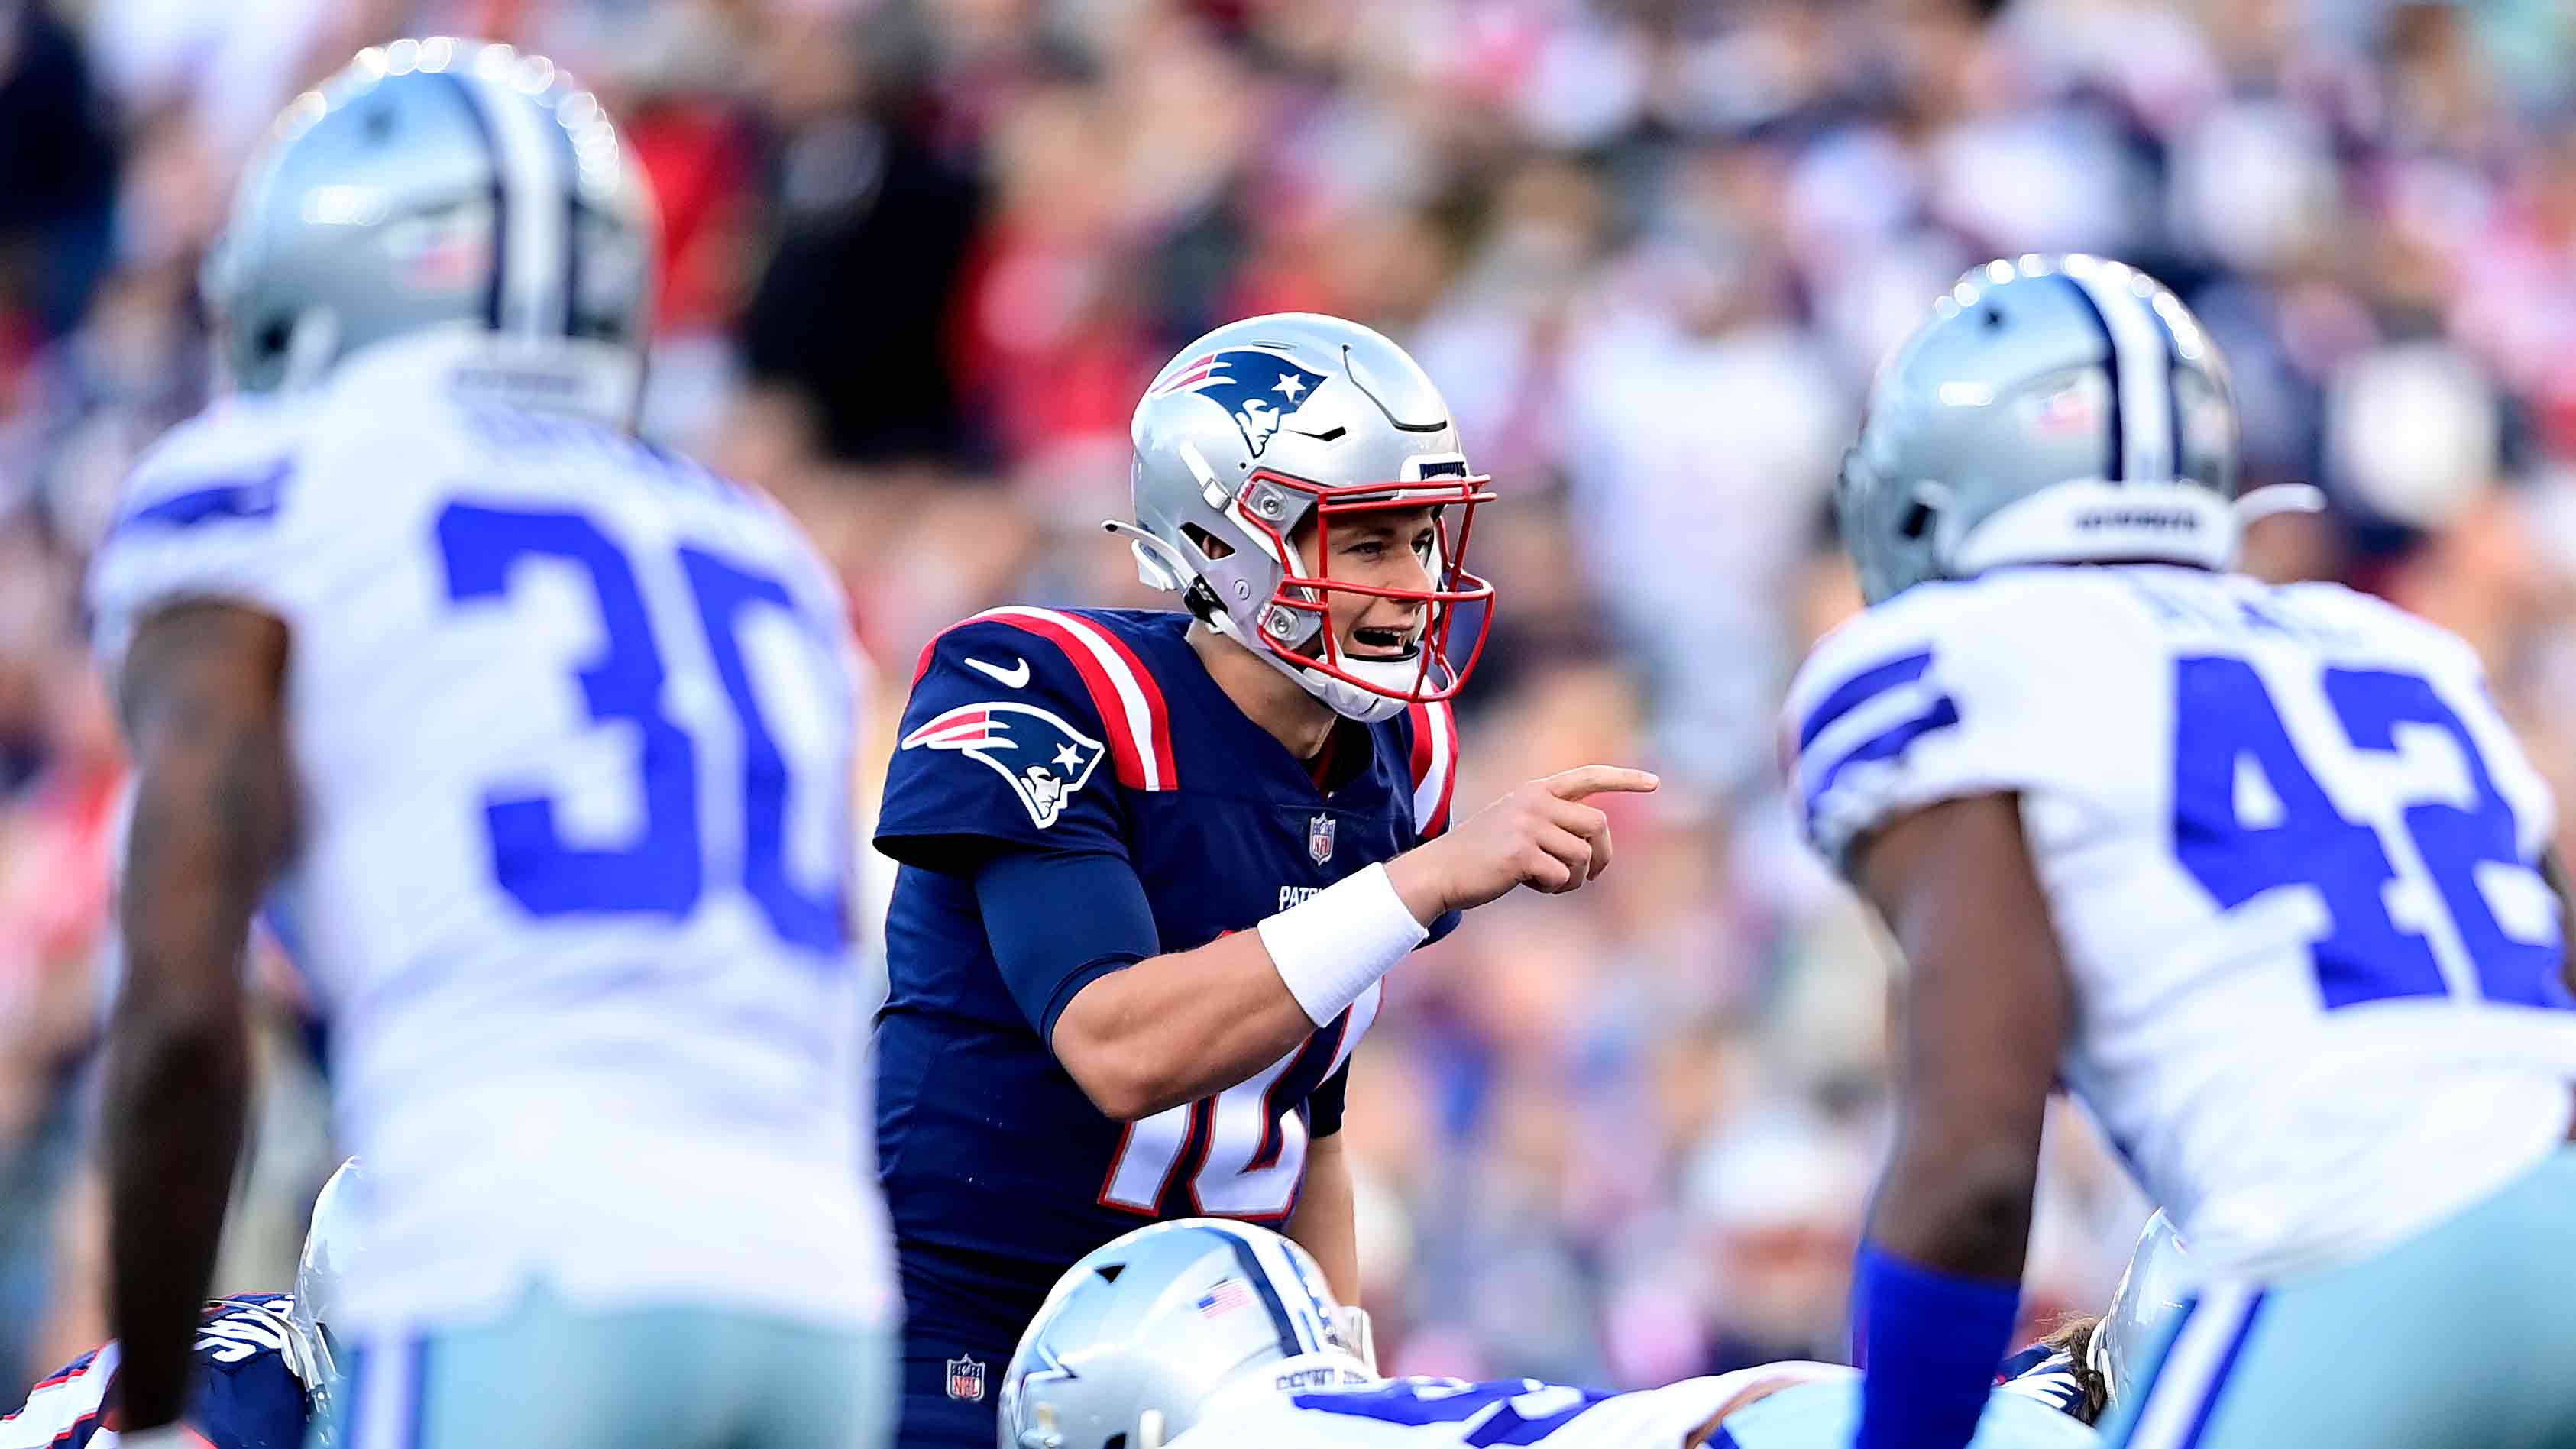 Patriots vs. Cowboys: How to Watch the Week 4 NFL Game Online